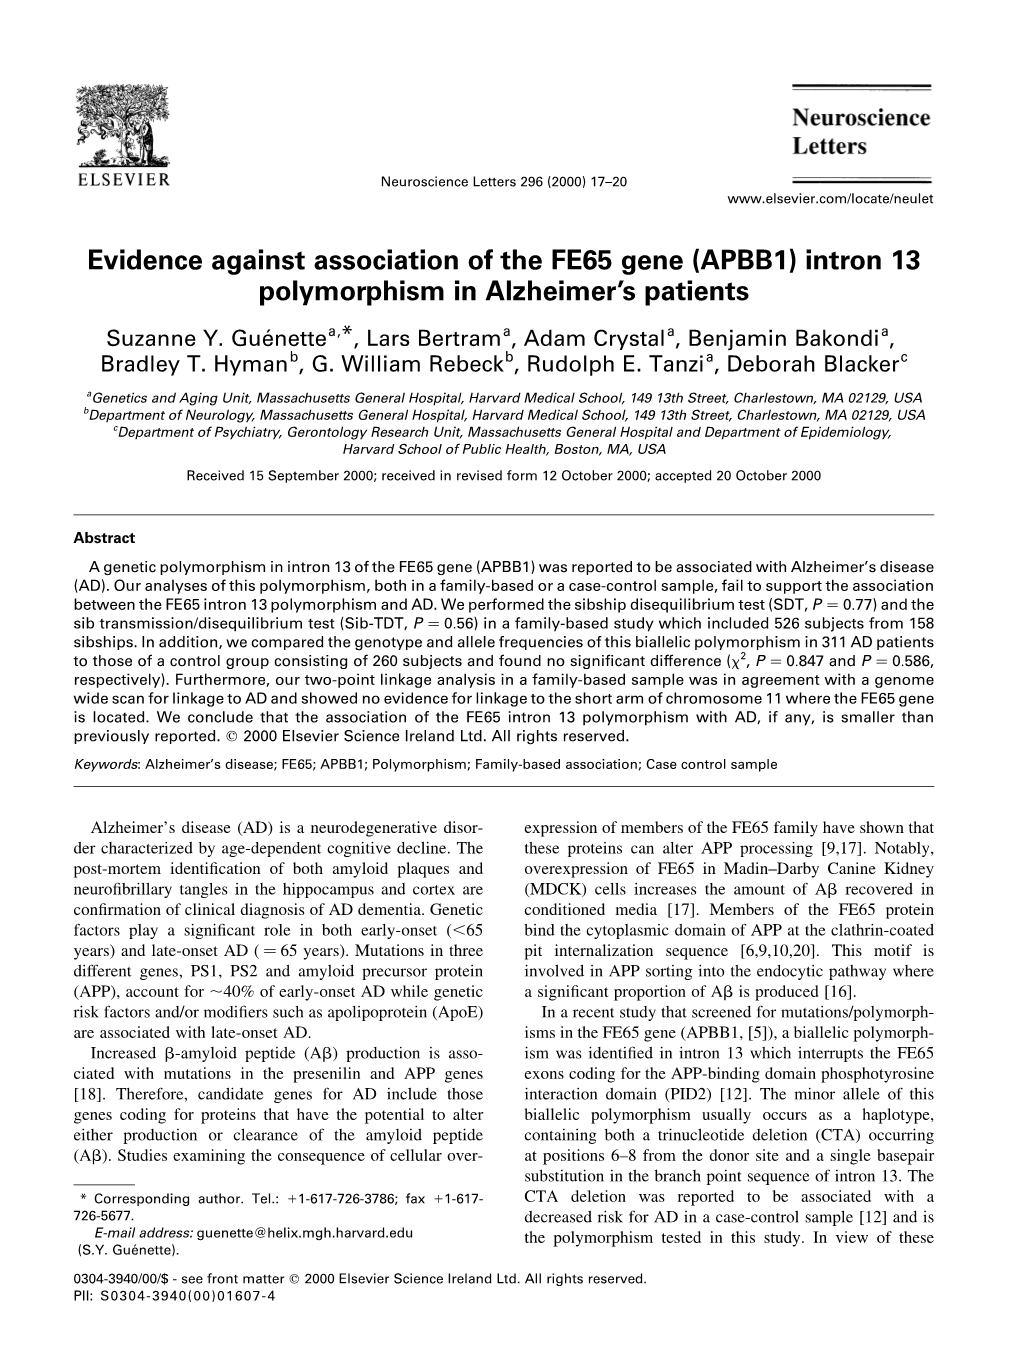 Evidence Against Association of the FE65 Gene (APBB1) Intron 13 Polymorphism in Alzheimer's Patients